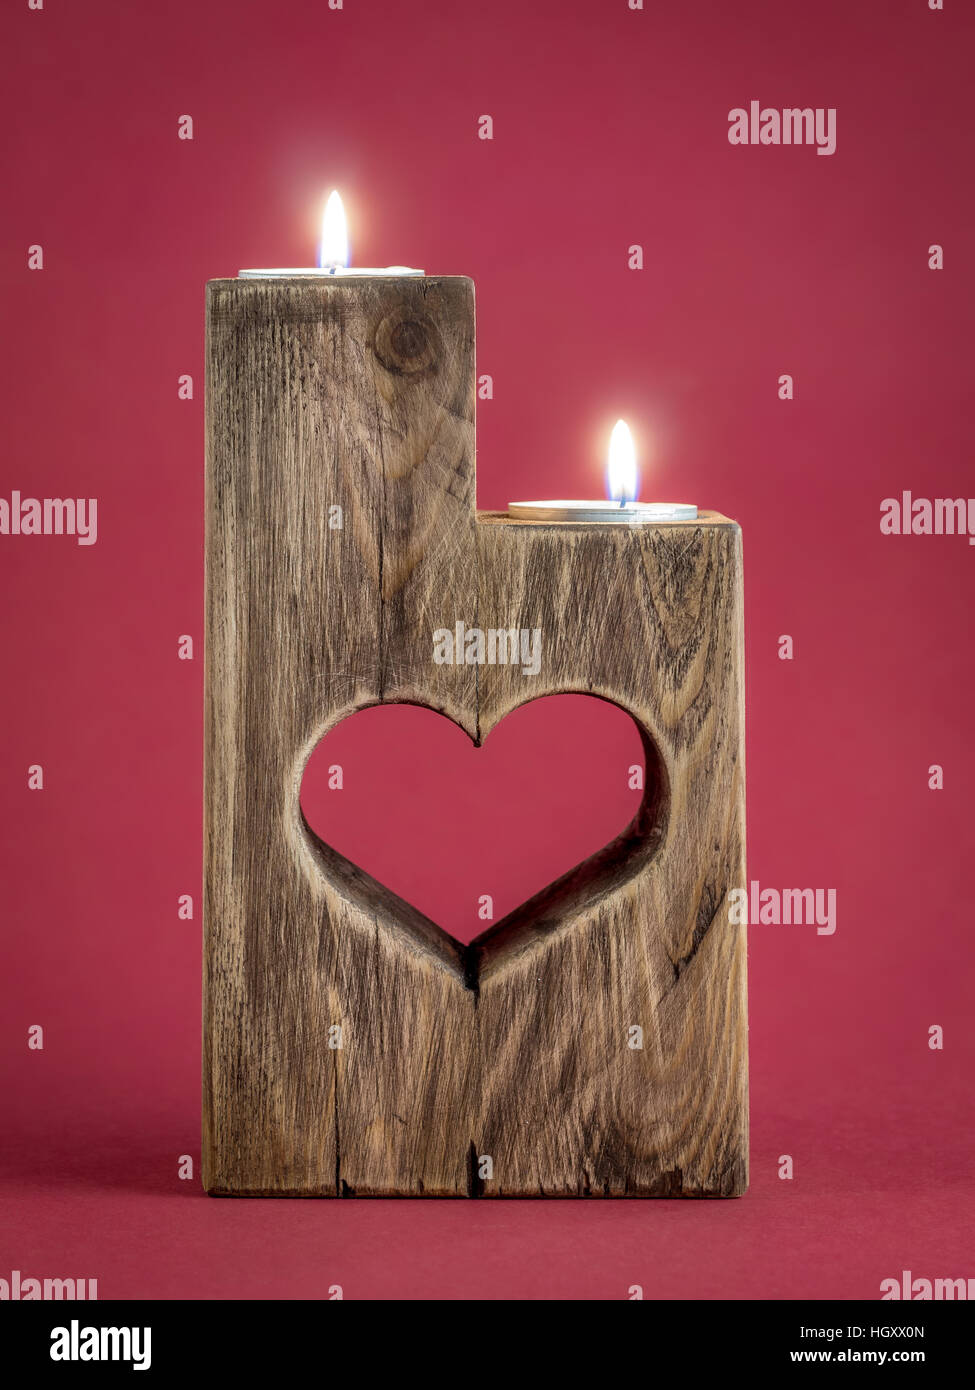 Lit romantic wooden candle holder with cut heart over red background Stock Photo